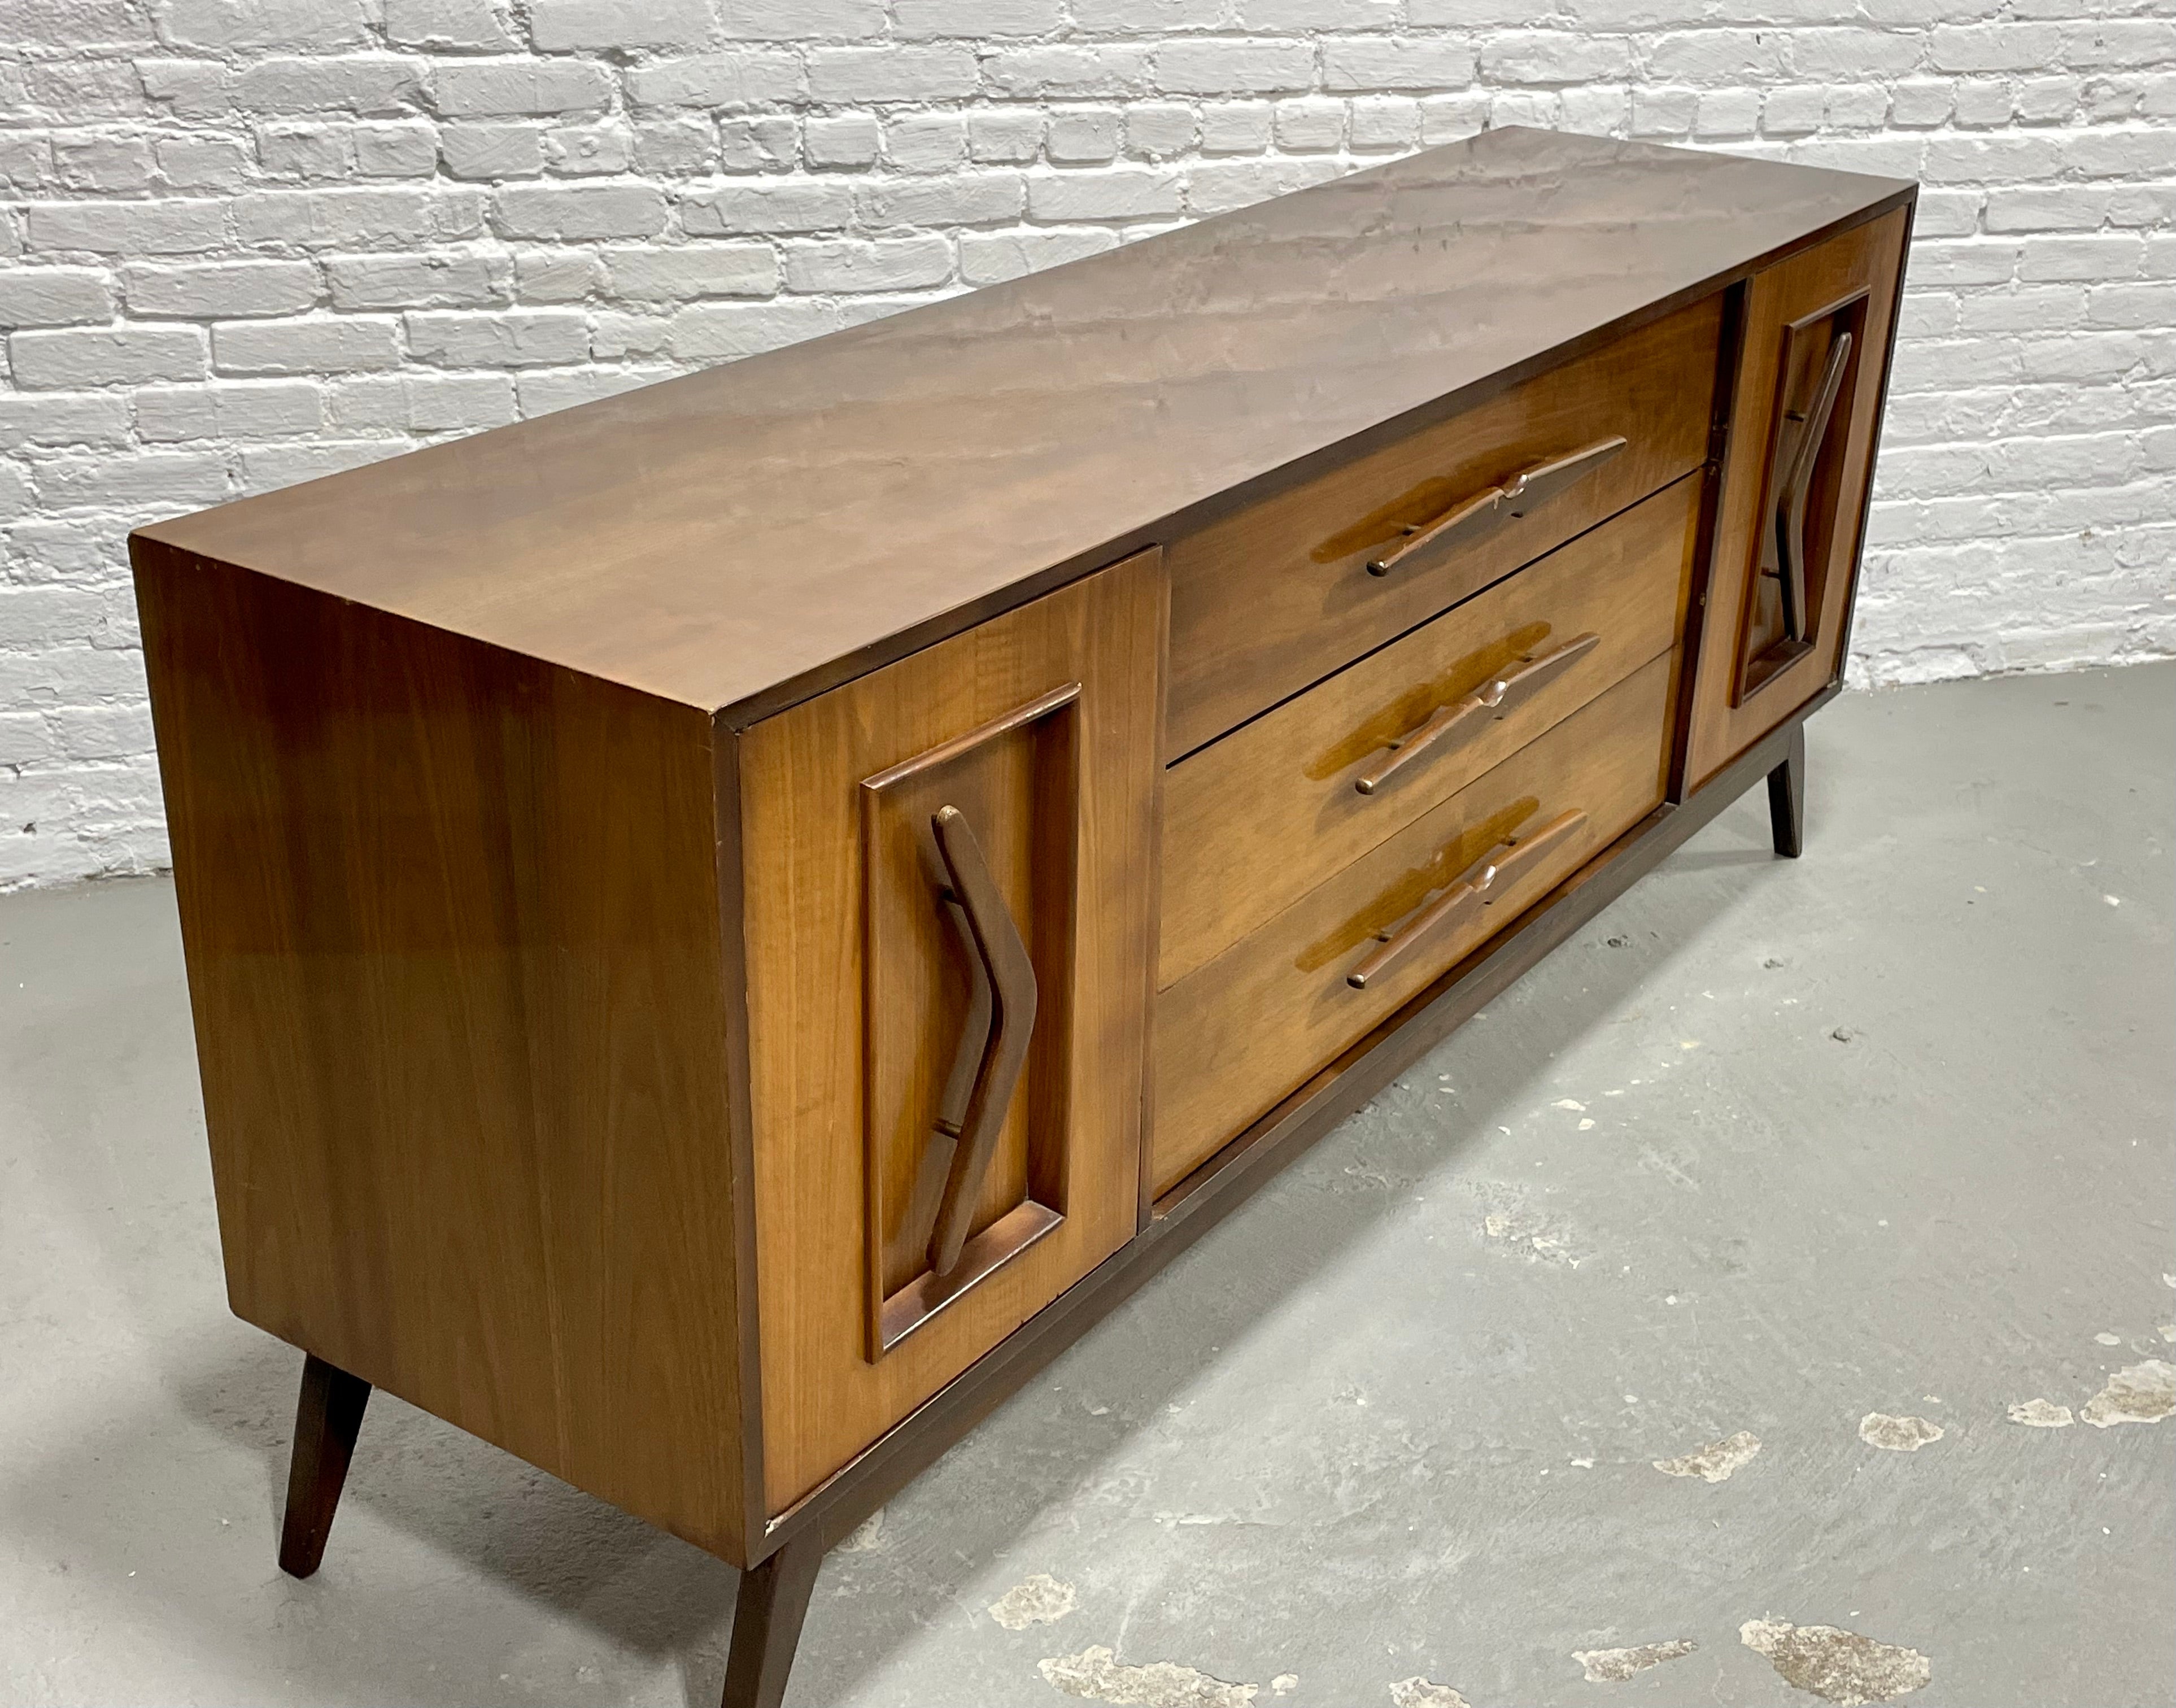 LONG + Sexy Mid Century MODERN Sculpted DRESSER / Credenza, c. 1960's